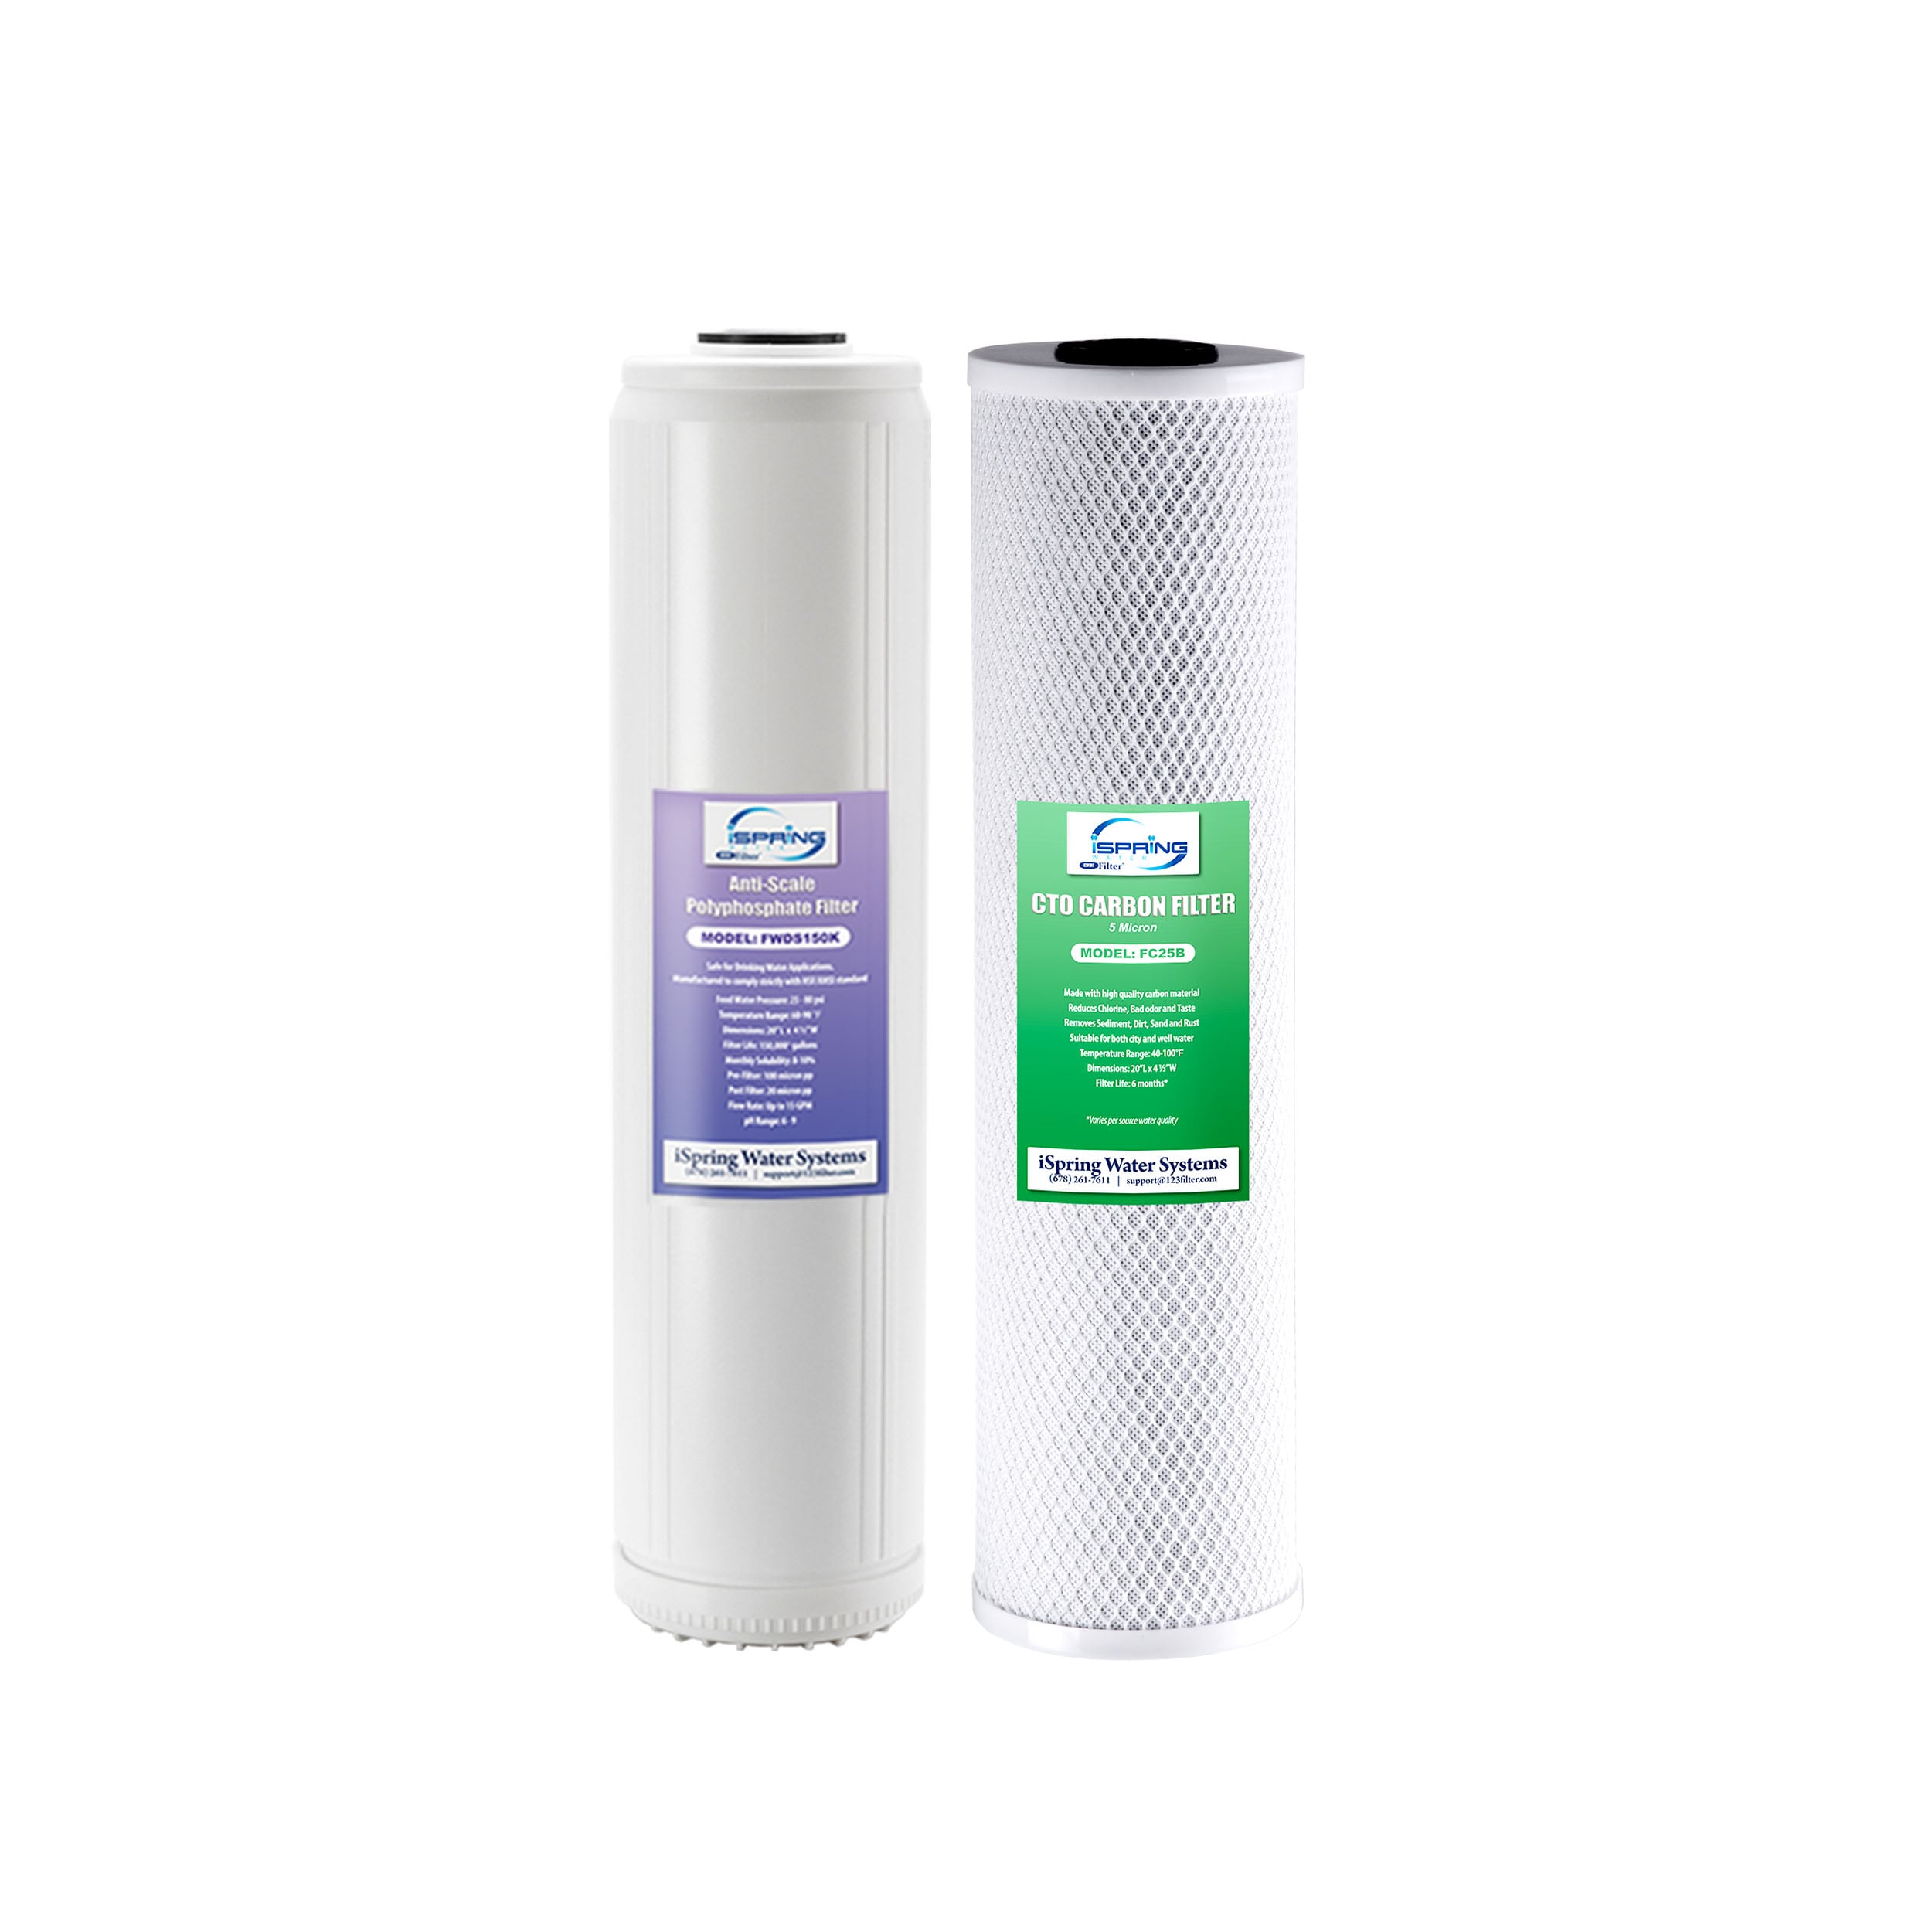 iSpring Polyphosphate Whole House Replacement Filter in the